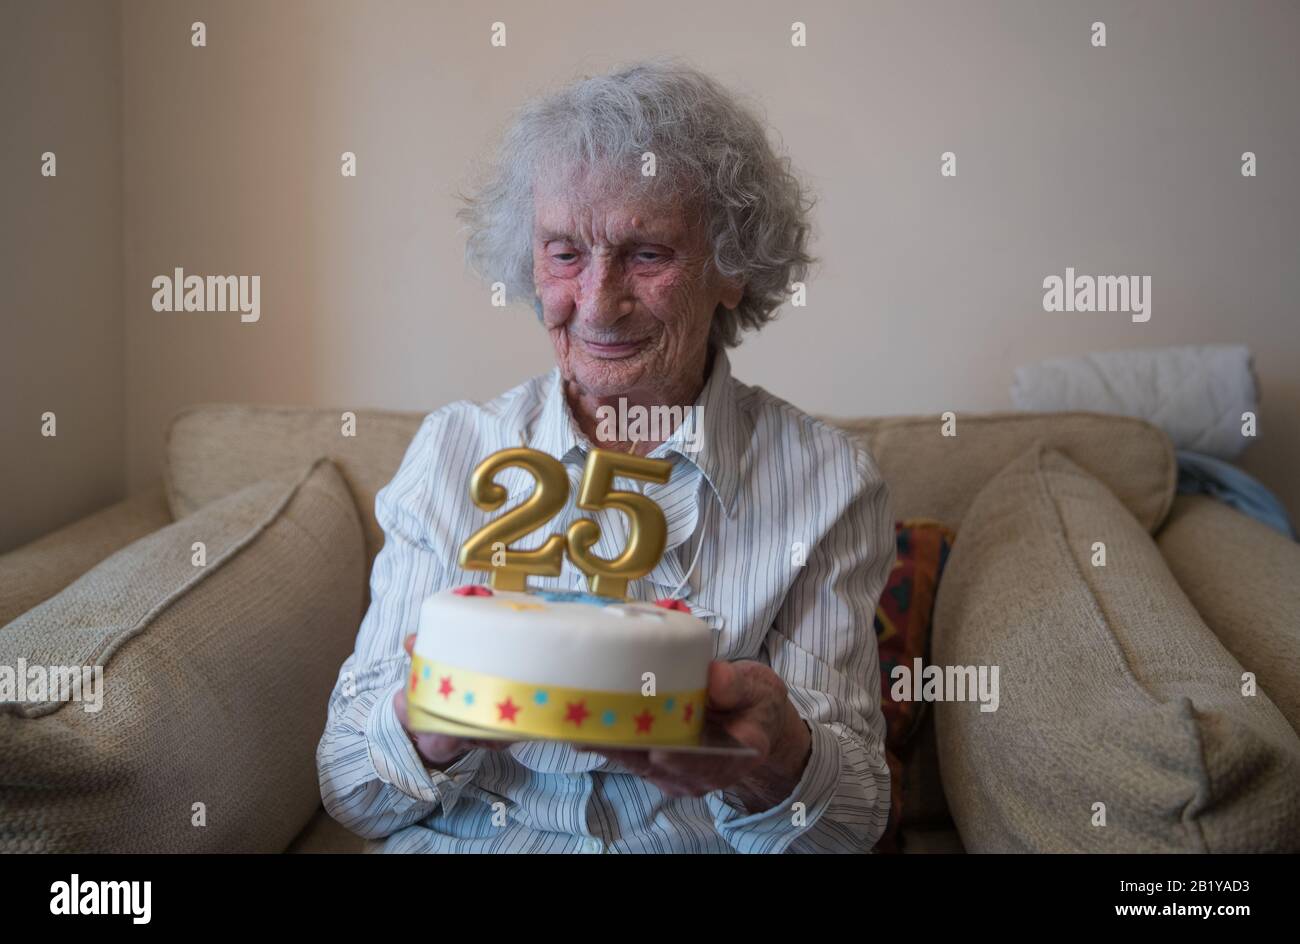 Great-great grandmother Doris Cleife holds a birthday cake with candles showing the number 25, in her flat at Housing 21's Brunel Court in Portsmouth, as she prepares to turn 100 years old on 29th February, though it is only the 25th time Doris has been able to celebrate her birthday due to being born during a leap year. Stock Photo